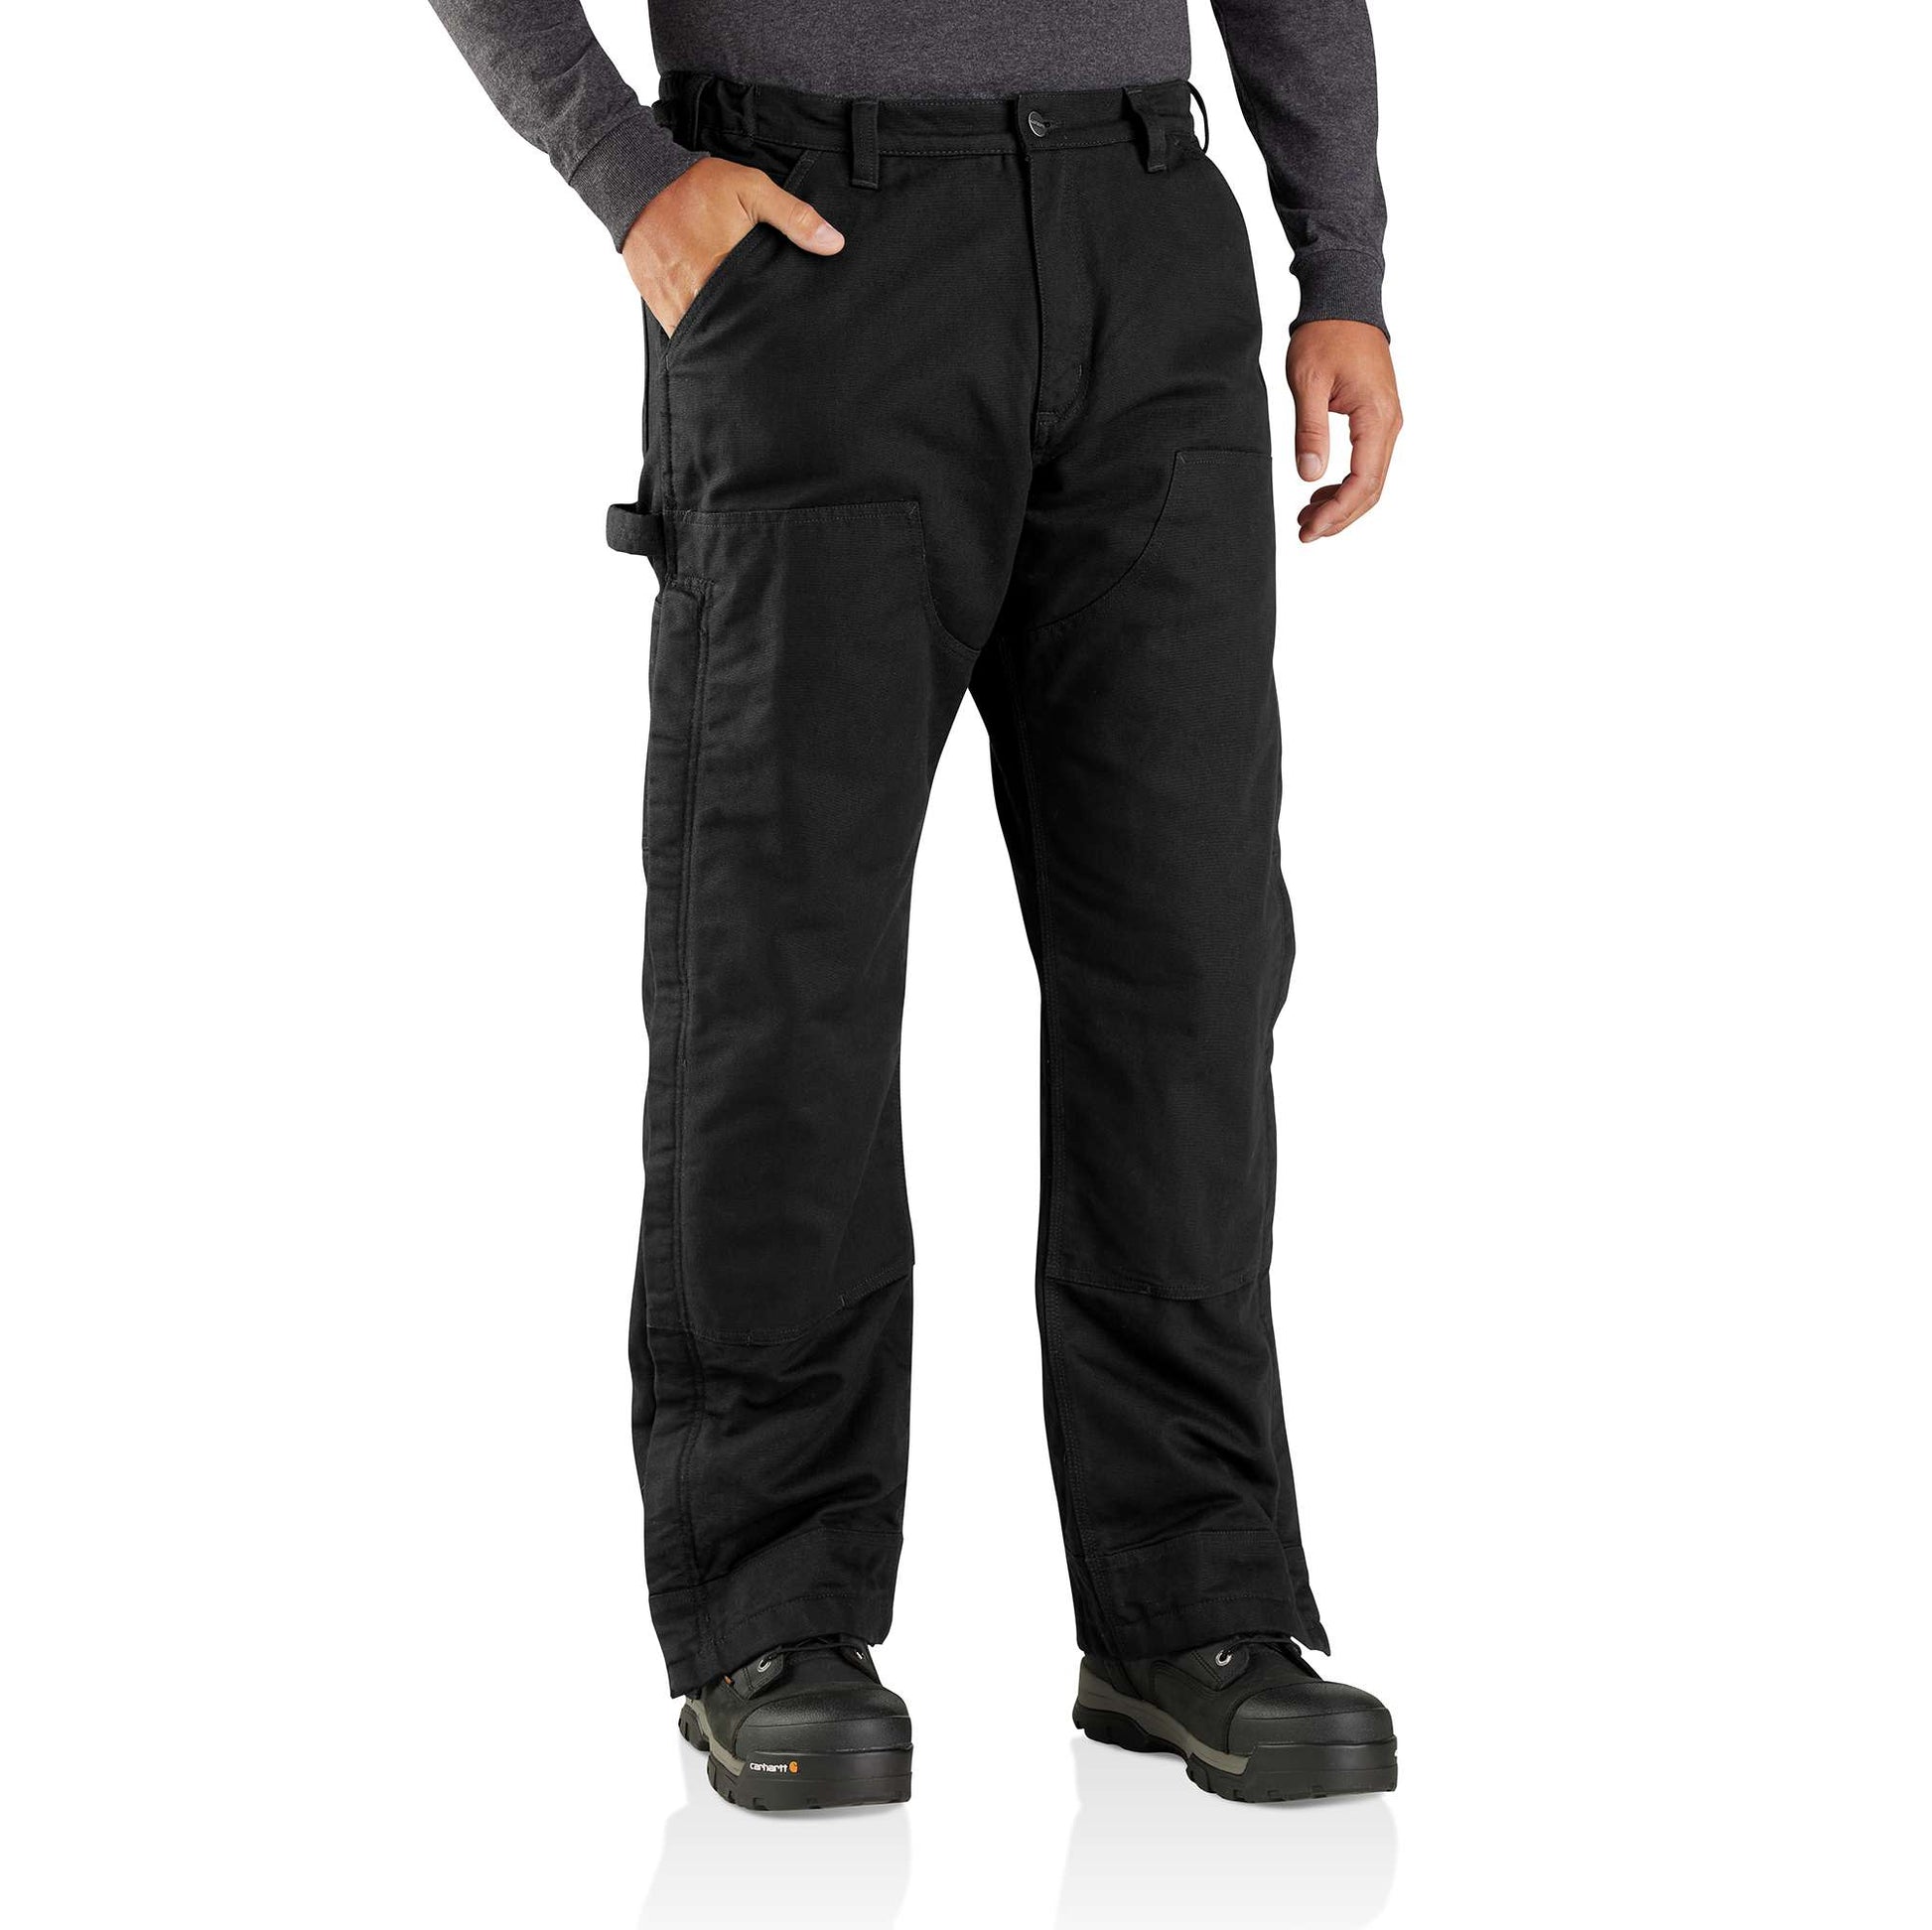 Carhartt Pants: Men's 105471 Blk Black Loose Fit Washed Duck Insulated Pant